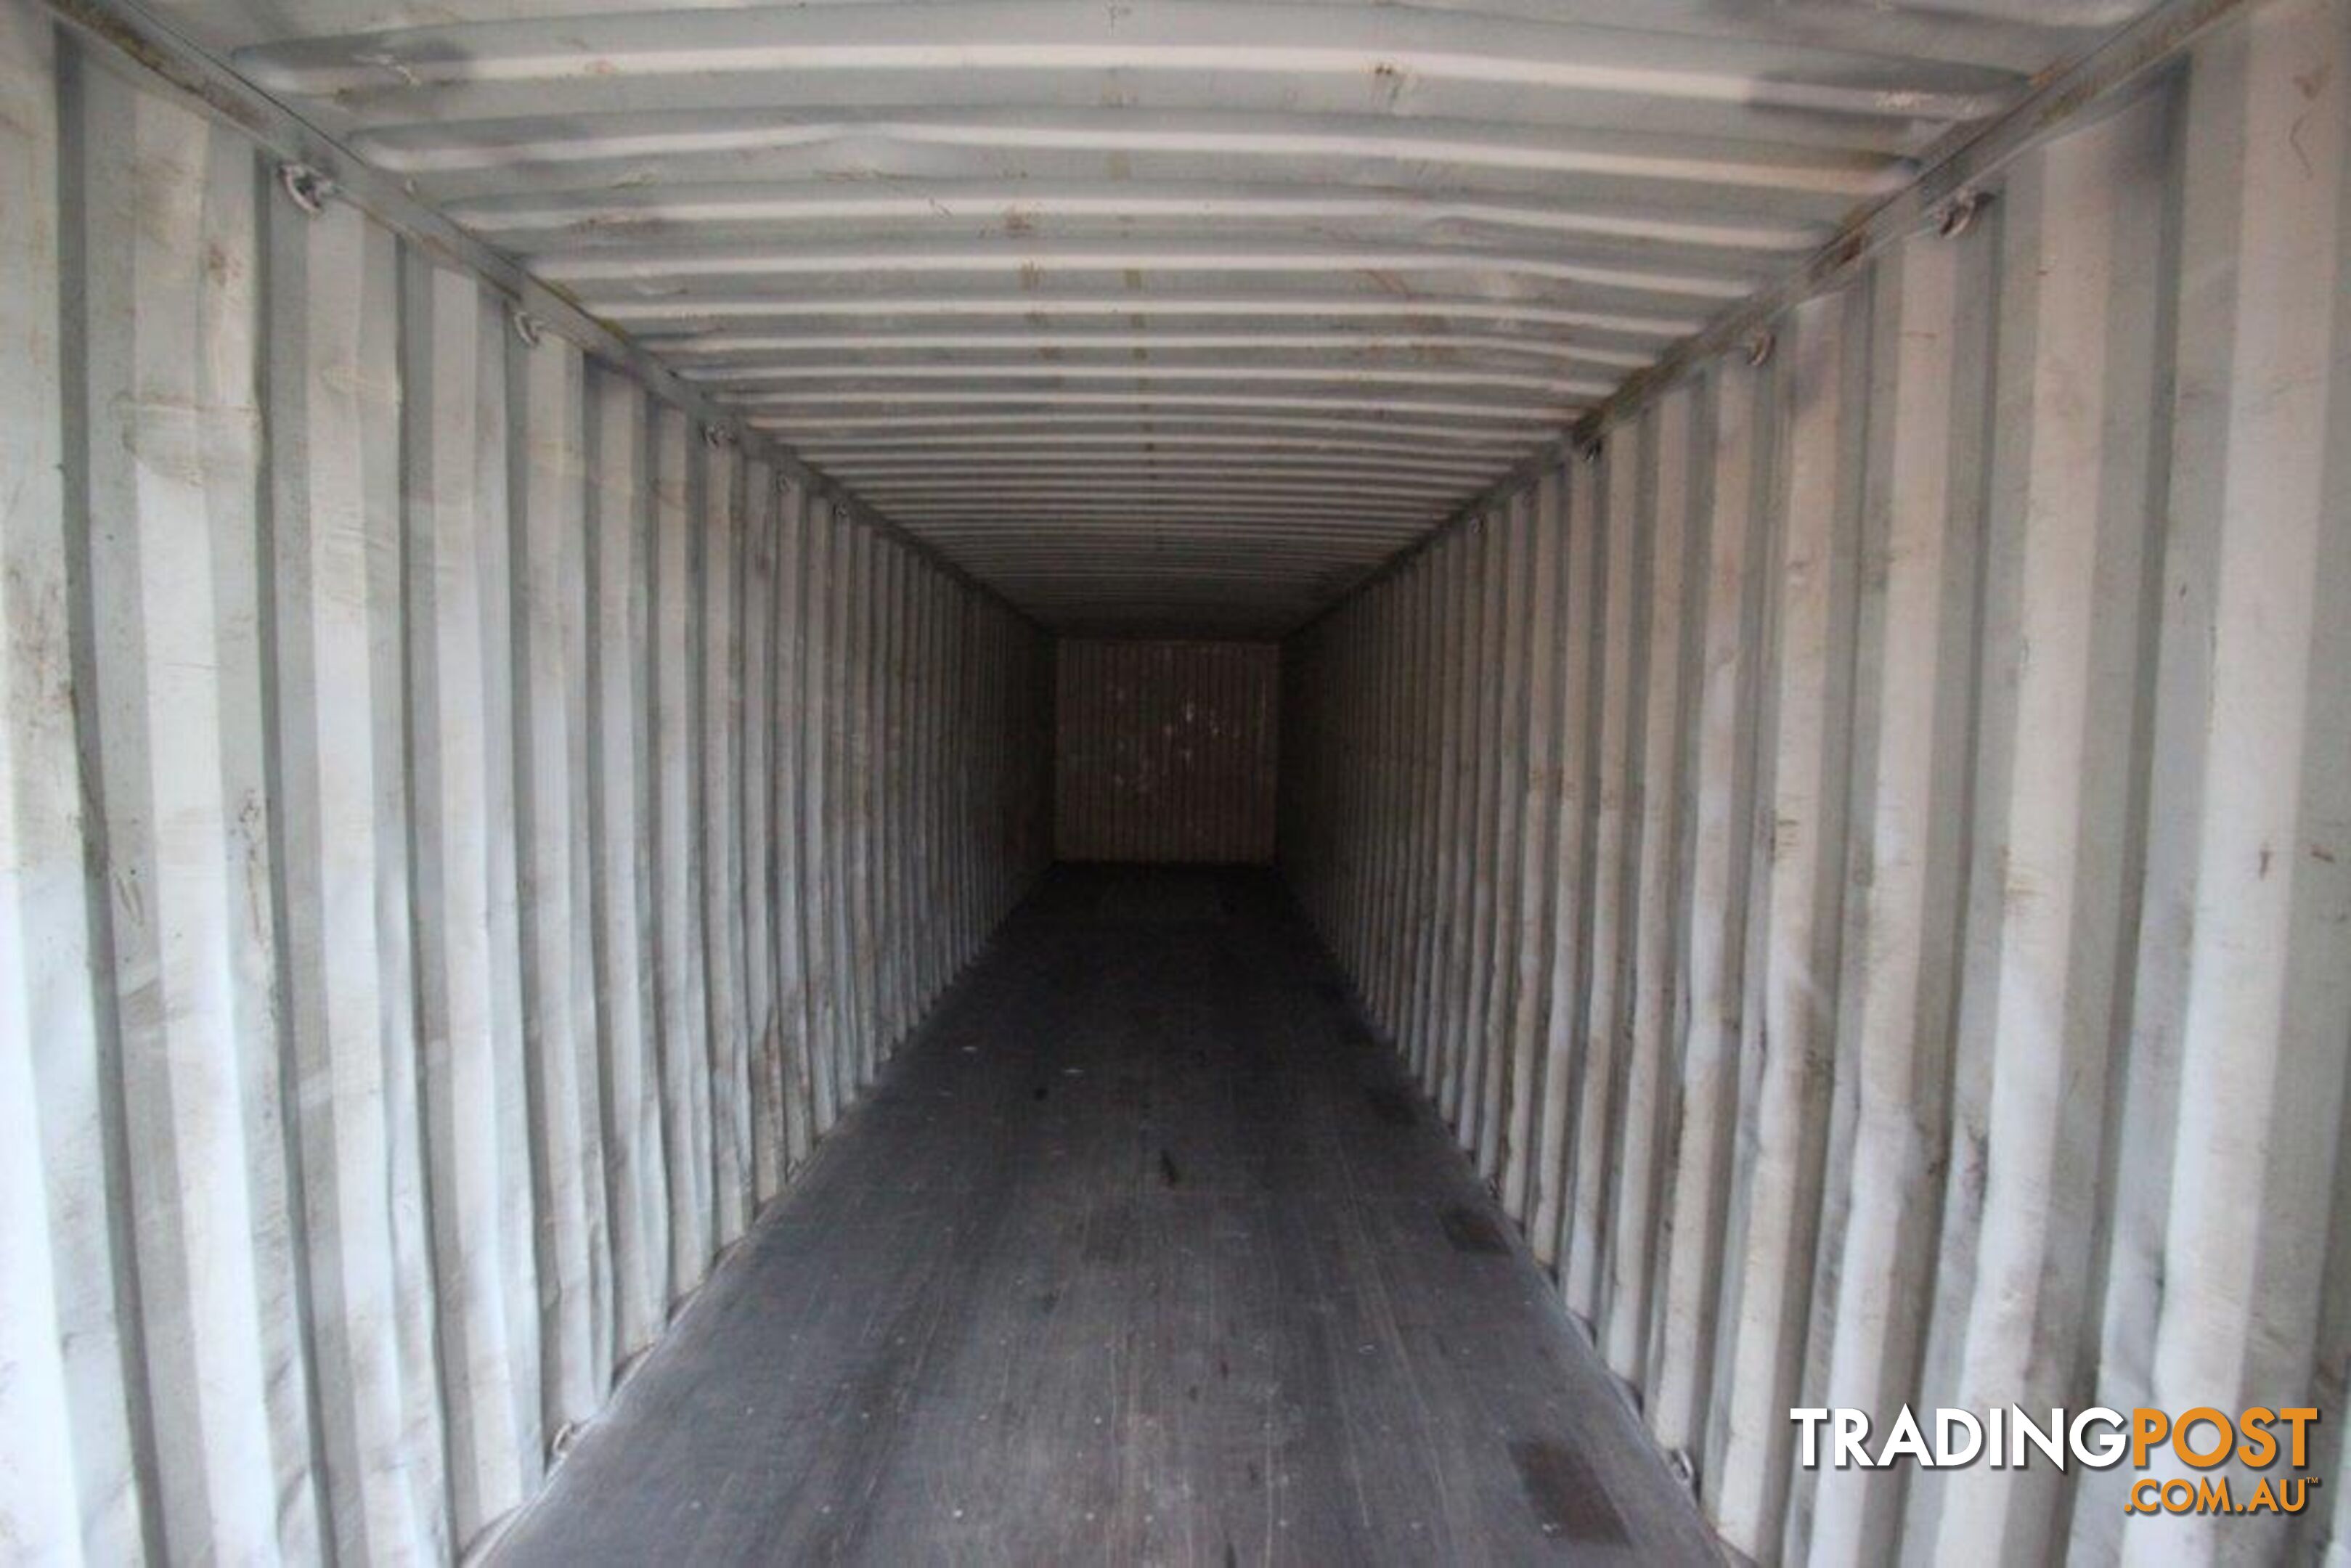 Used 40ft Shipping Containers Caboolture - From $3150 + GST